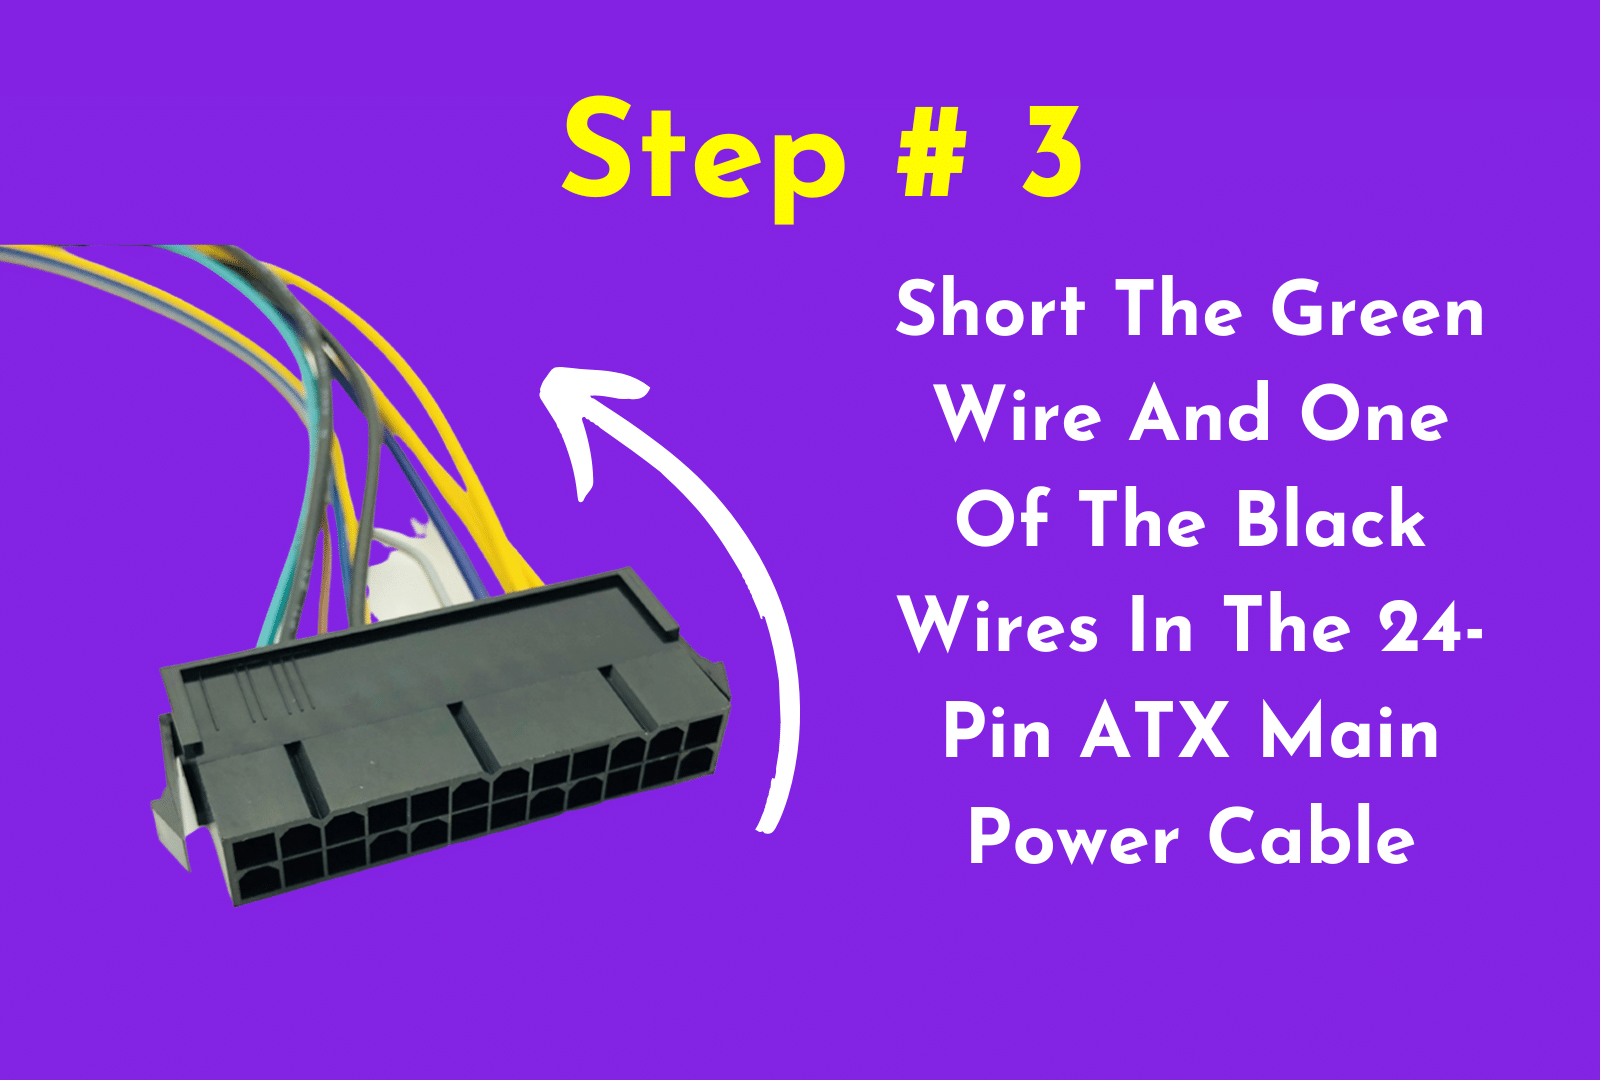 C:\Users\Mohsin\Downloads\Short The Green Wire And One Of The Black Wires In The 24-Pin ATX Main Power Cable.png